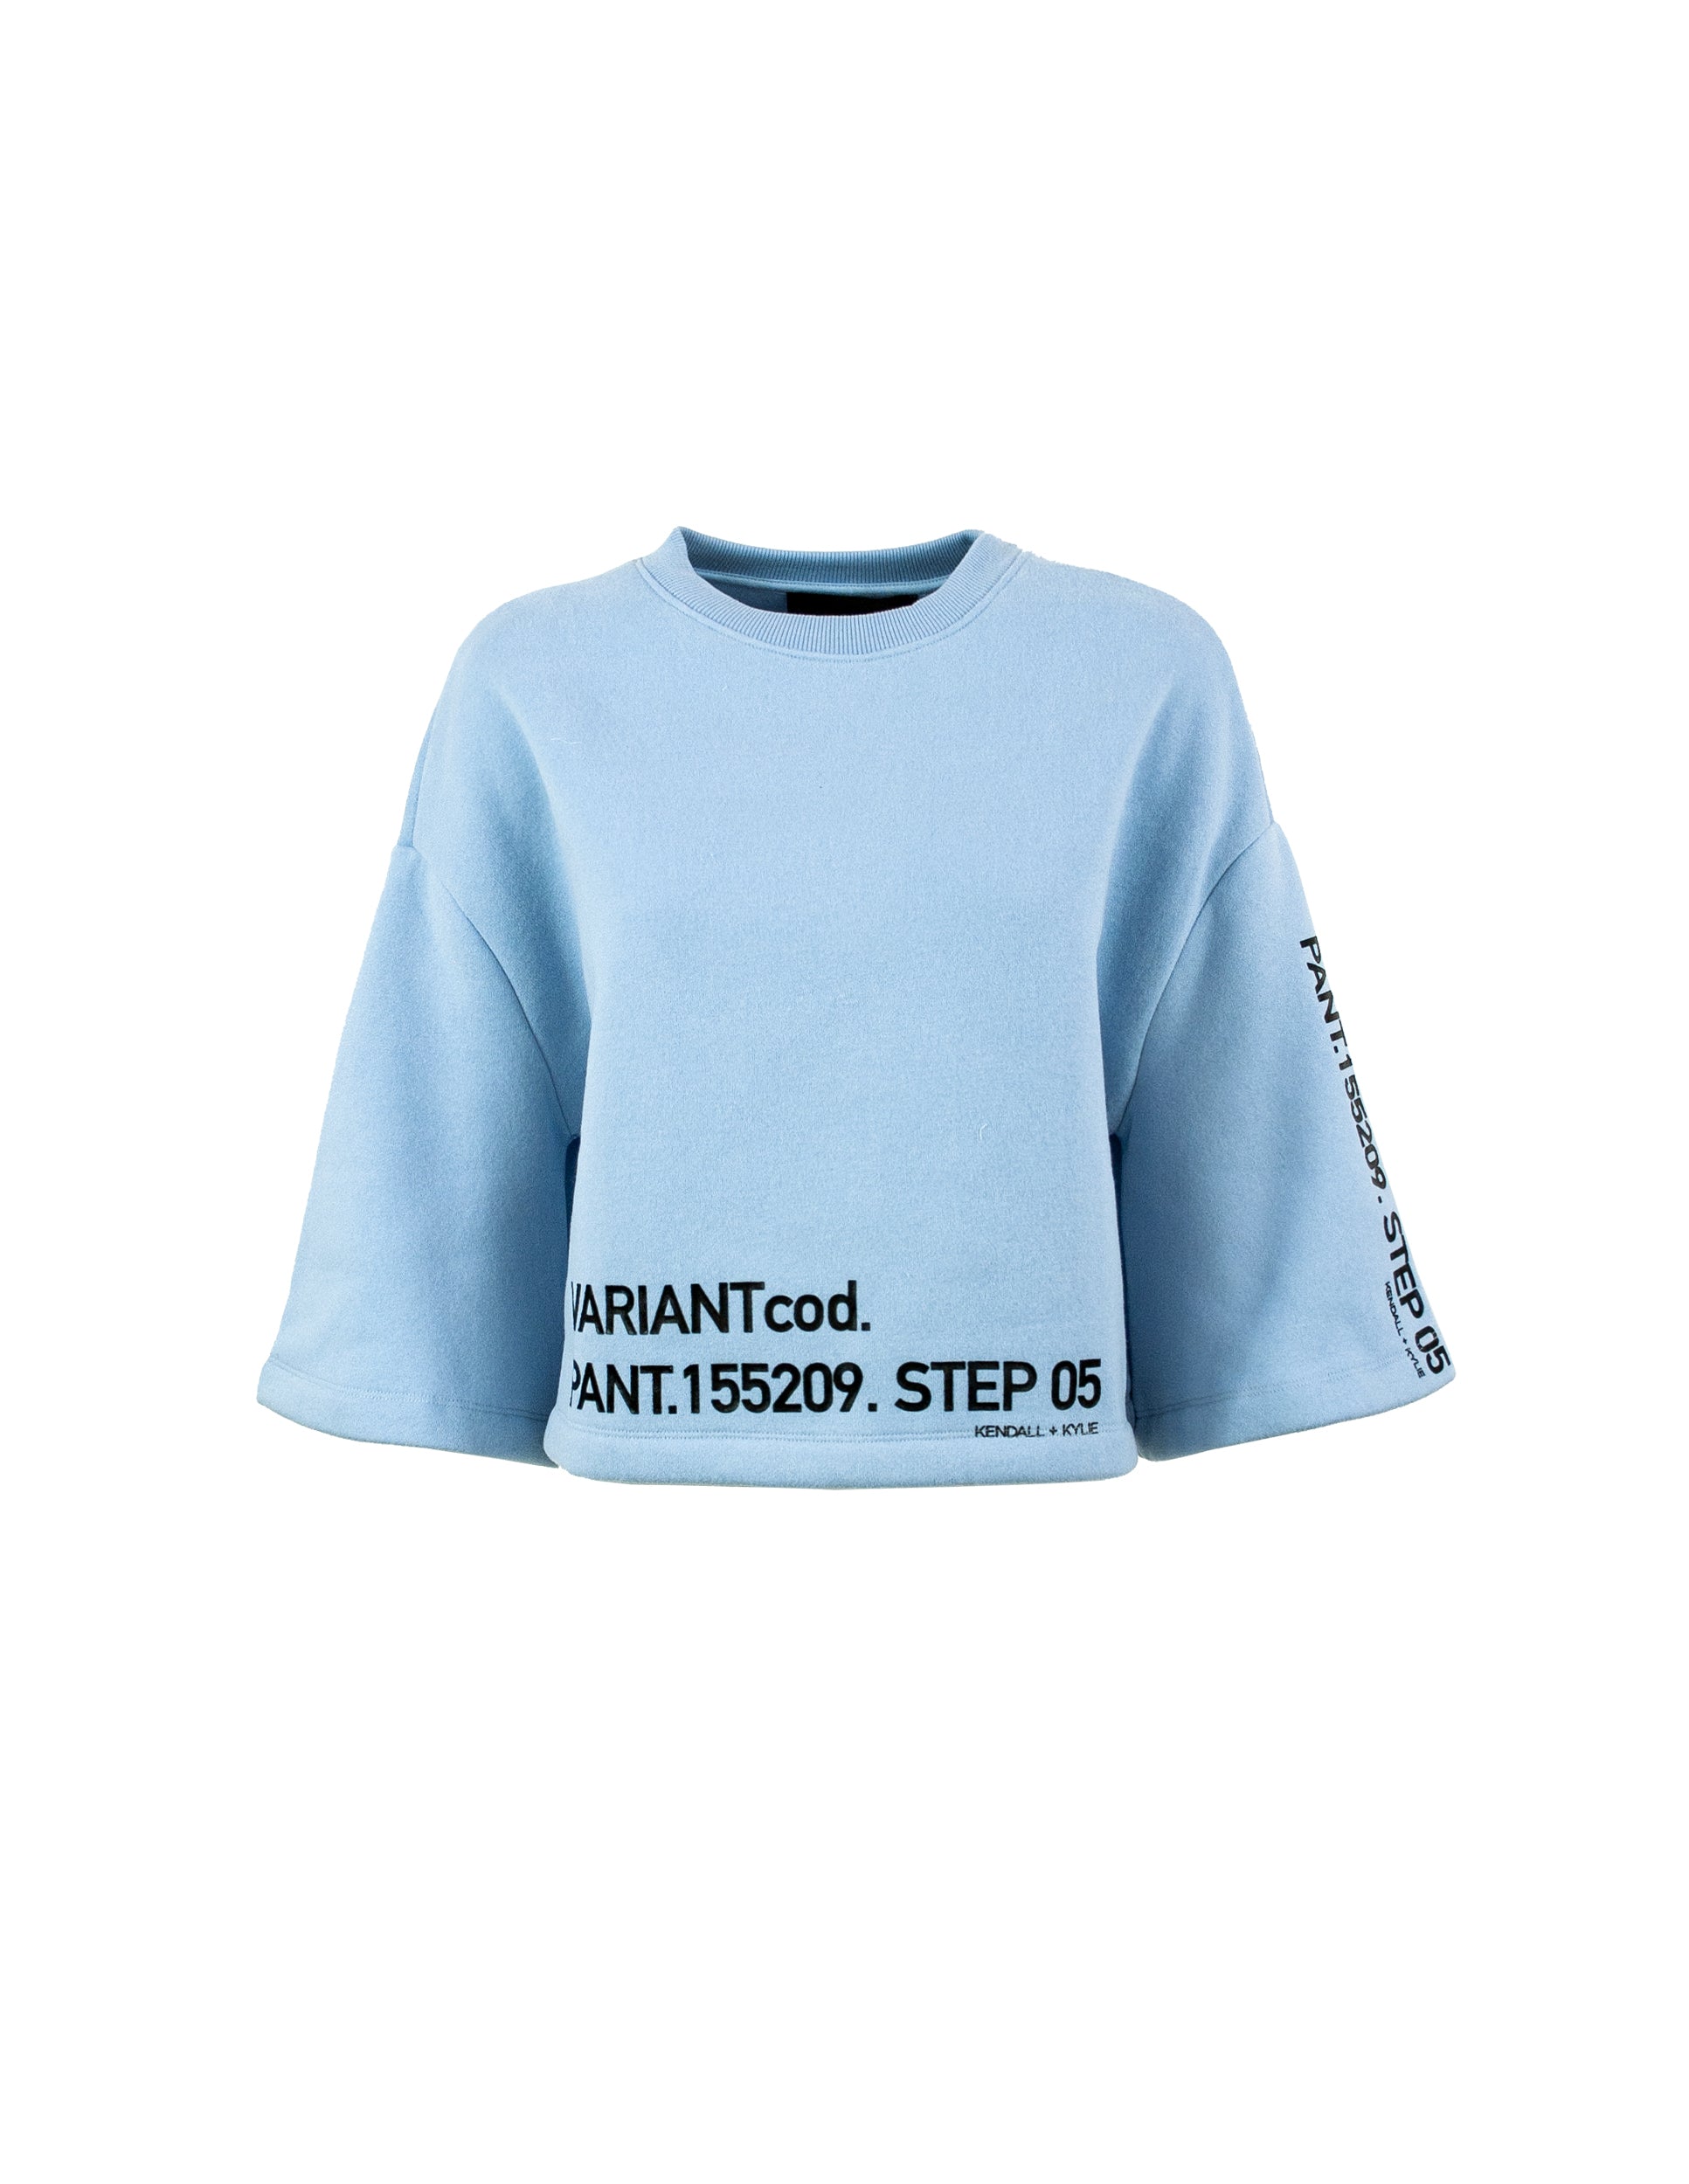 KENDALL AND KYLIE
Kendall + Kylie light blue crop sweatshirt with wide sleeves